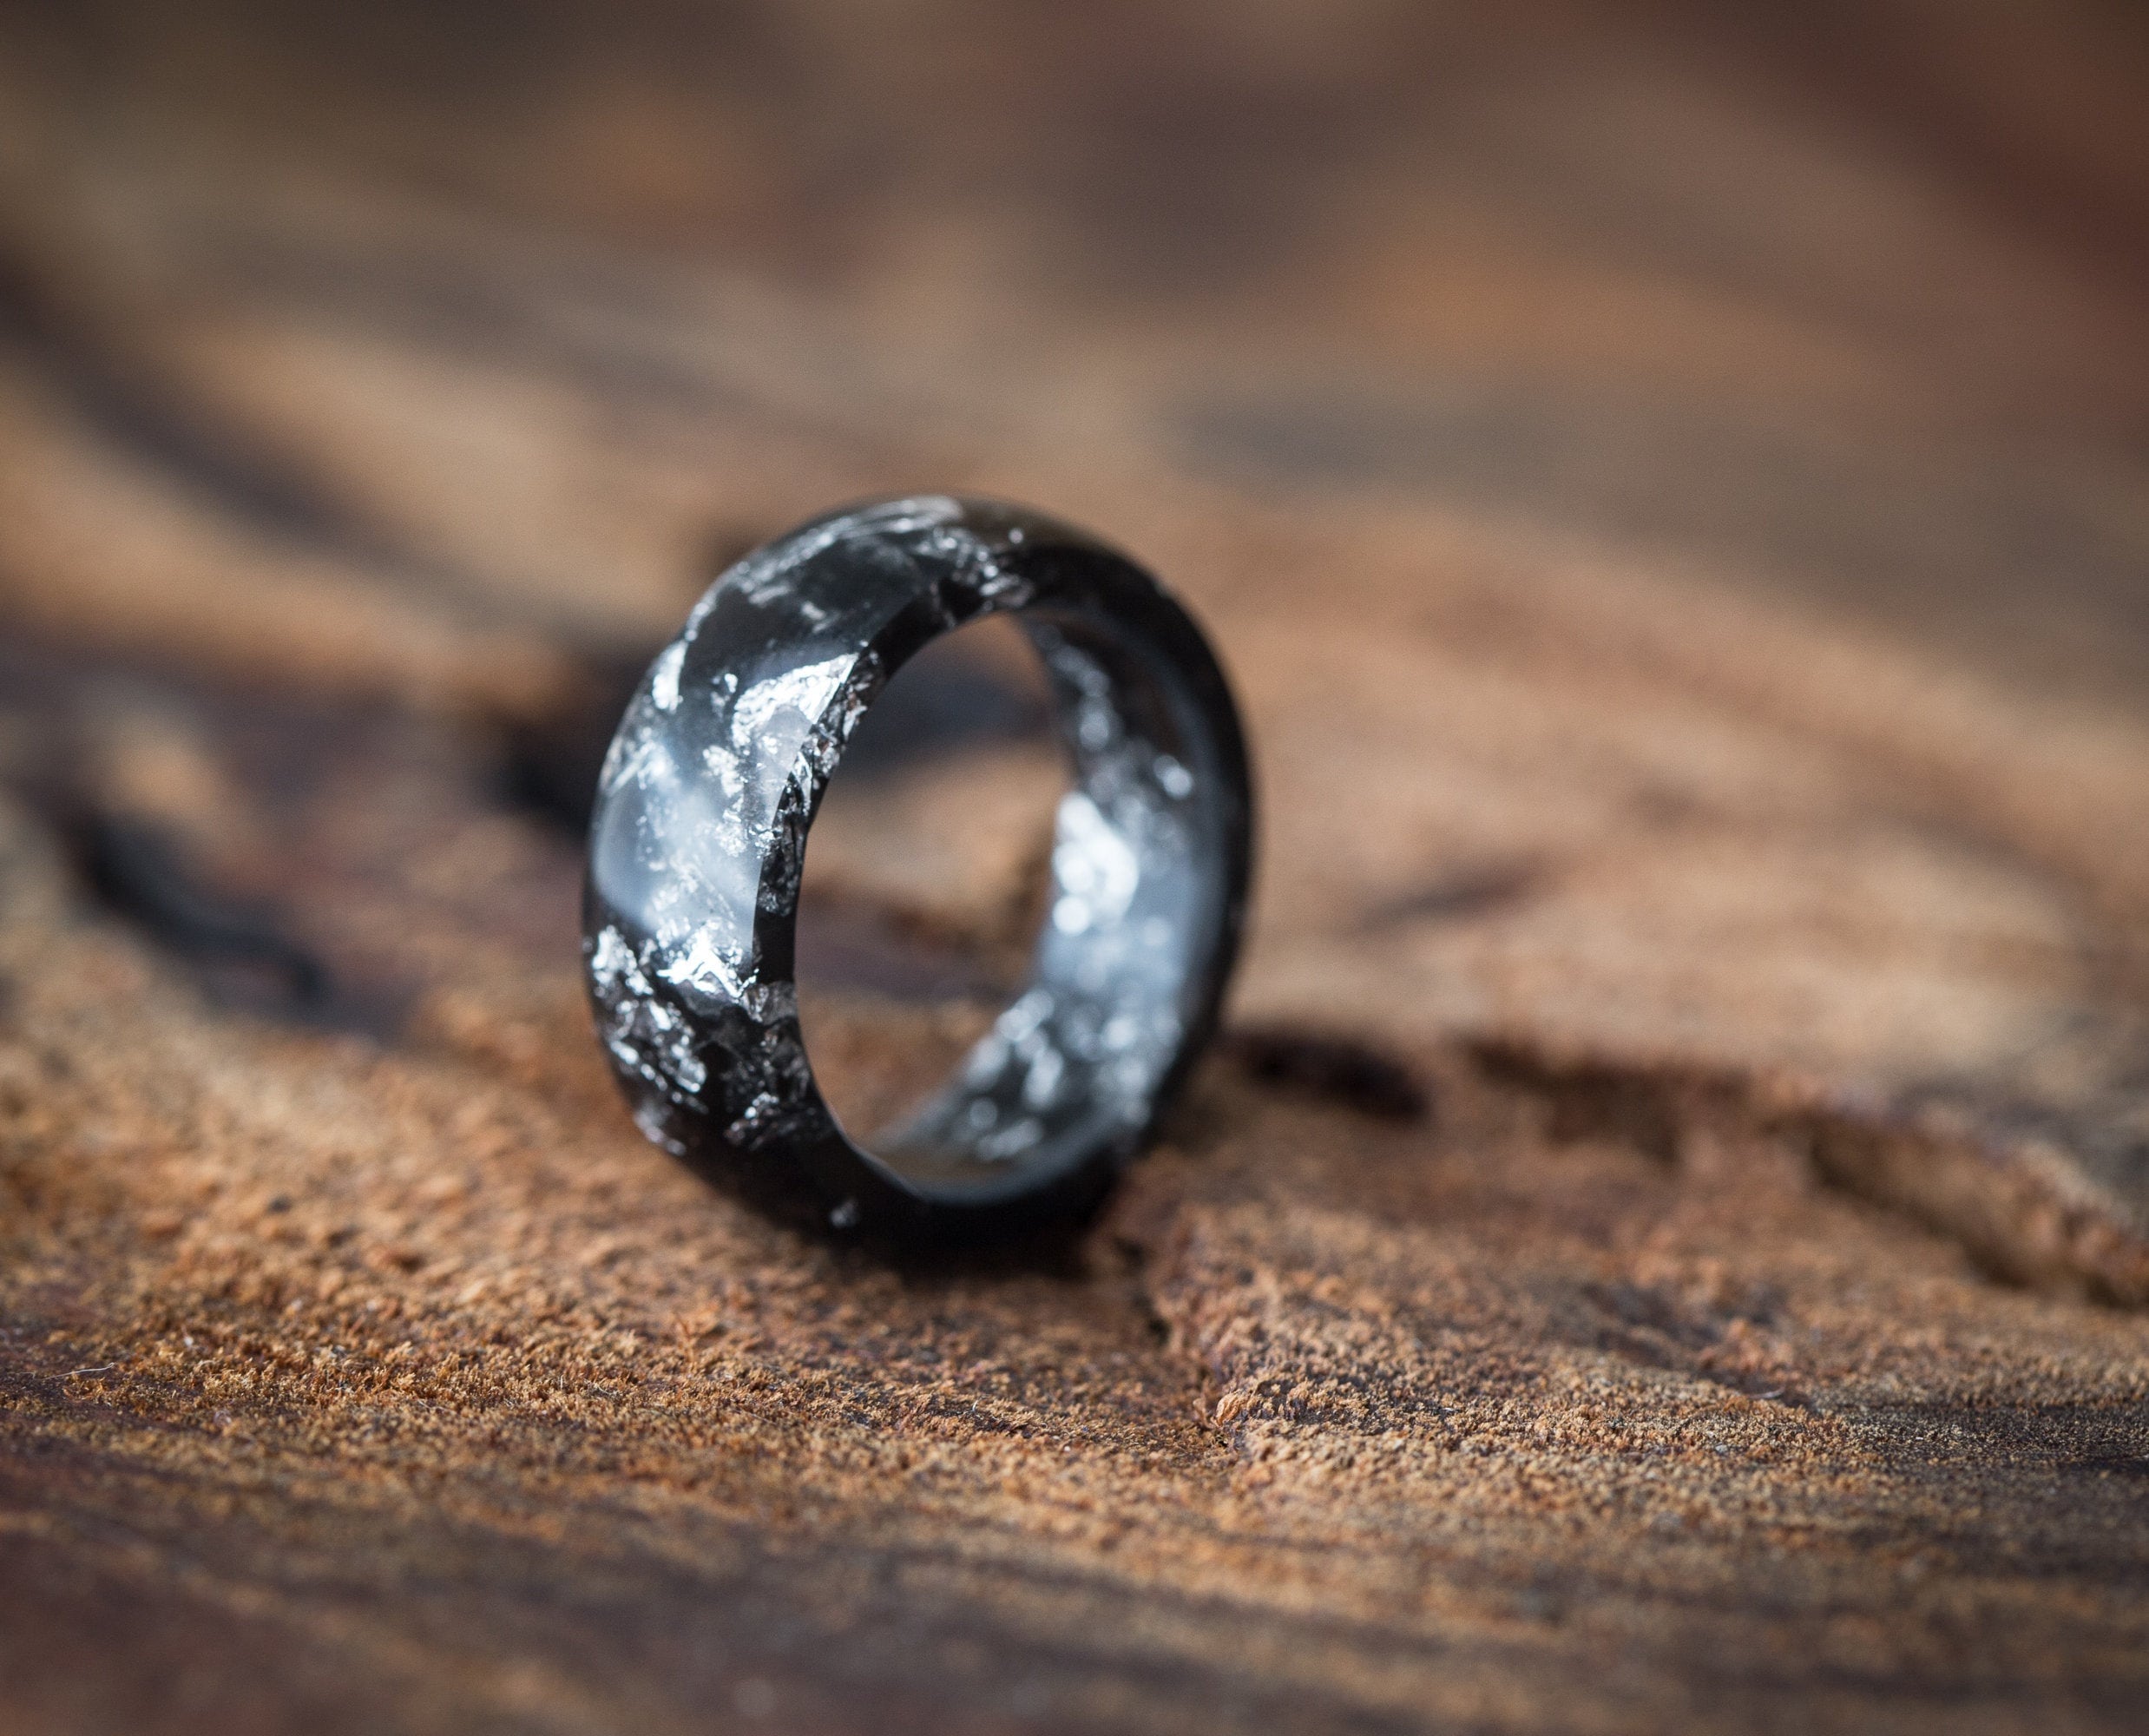 Rustic Silver Ring Mens Silver Ring Mens Jewelry Men's Silver Ring Boyfriend Gift Mens Rings Black Resin Ring Brushed Silver RIng